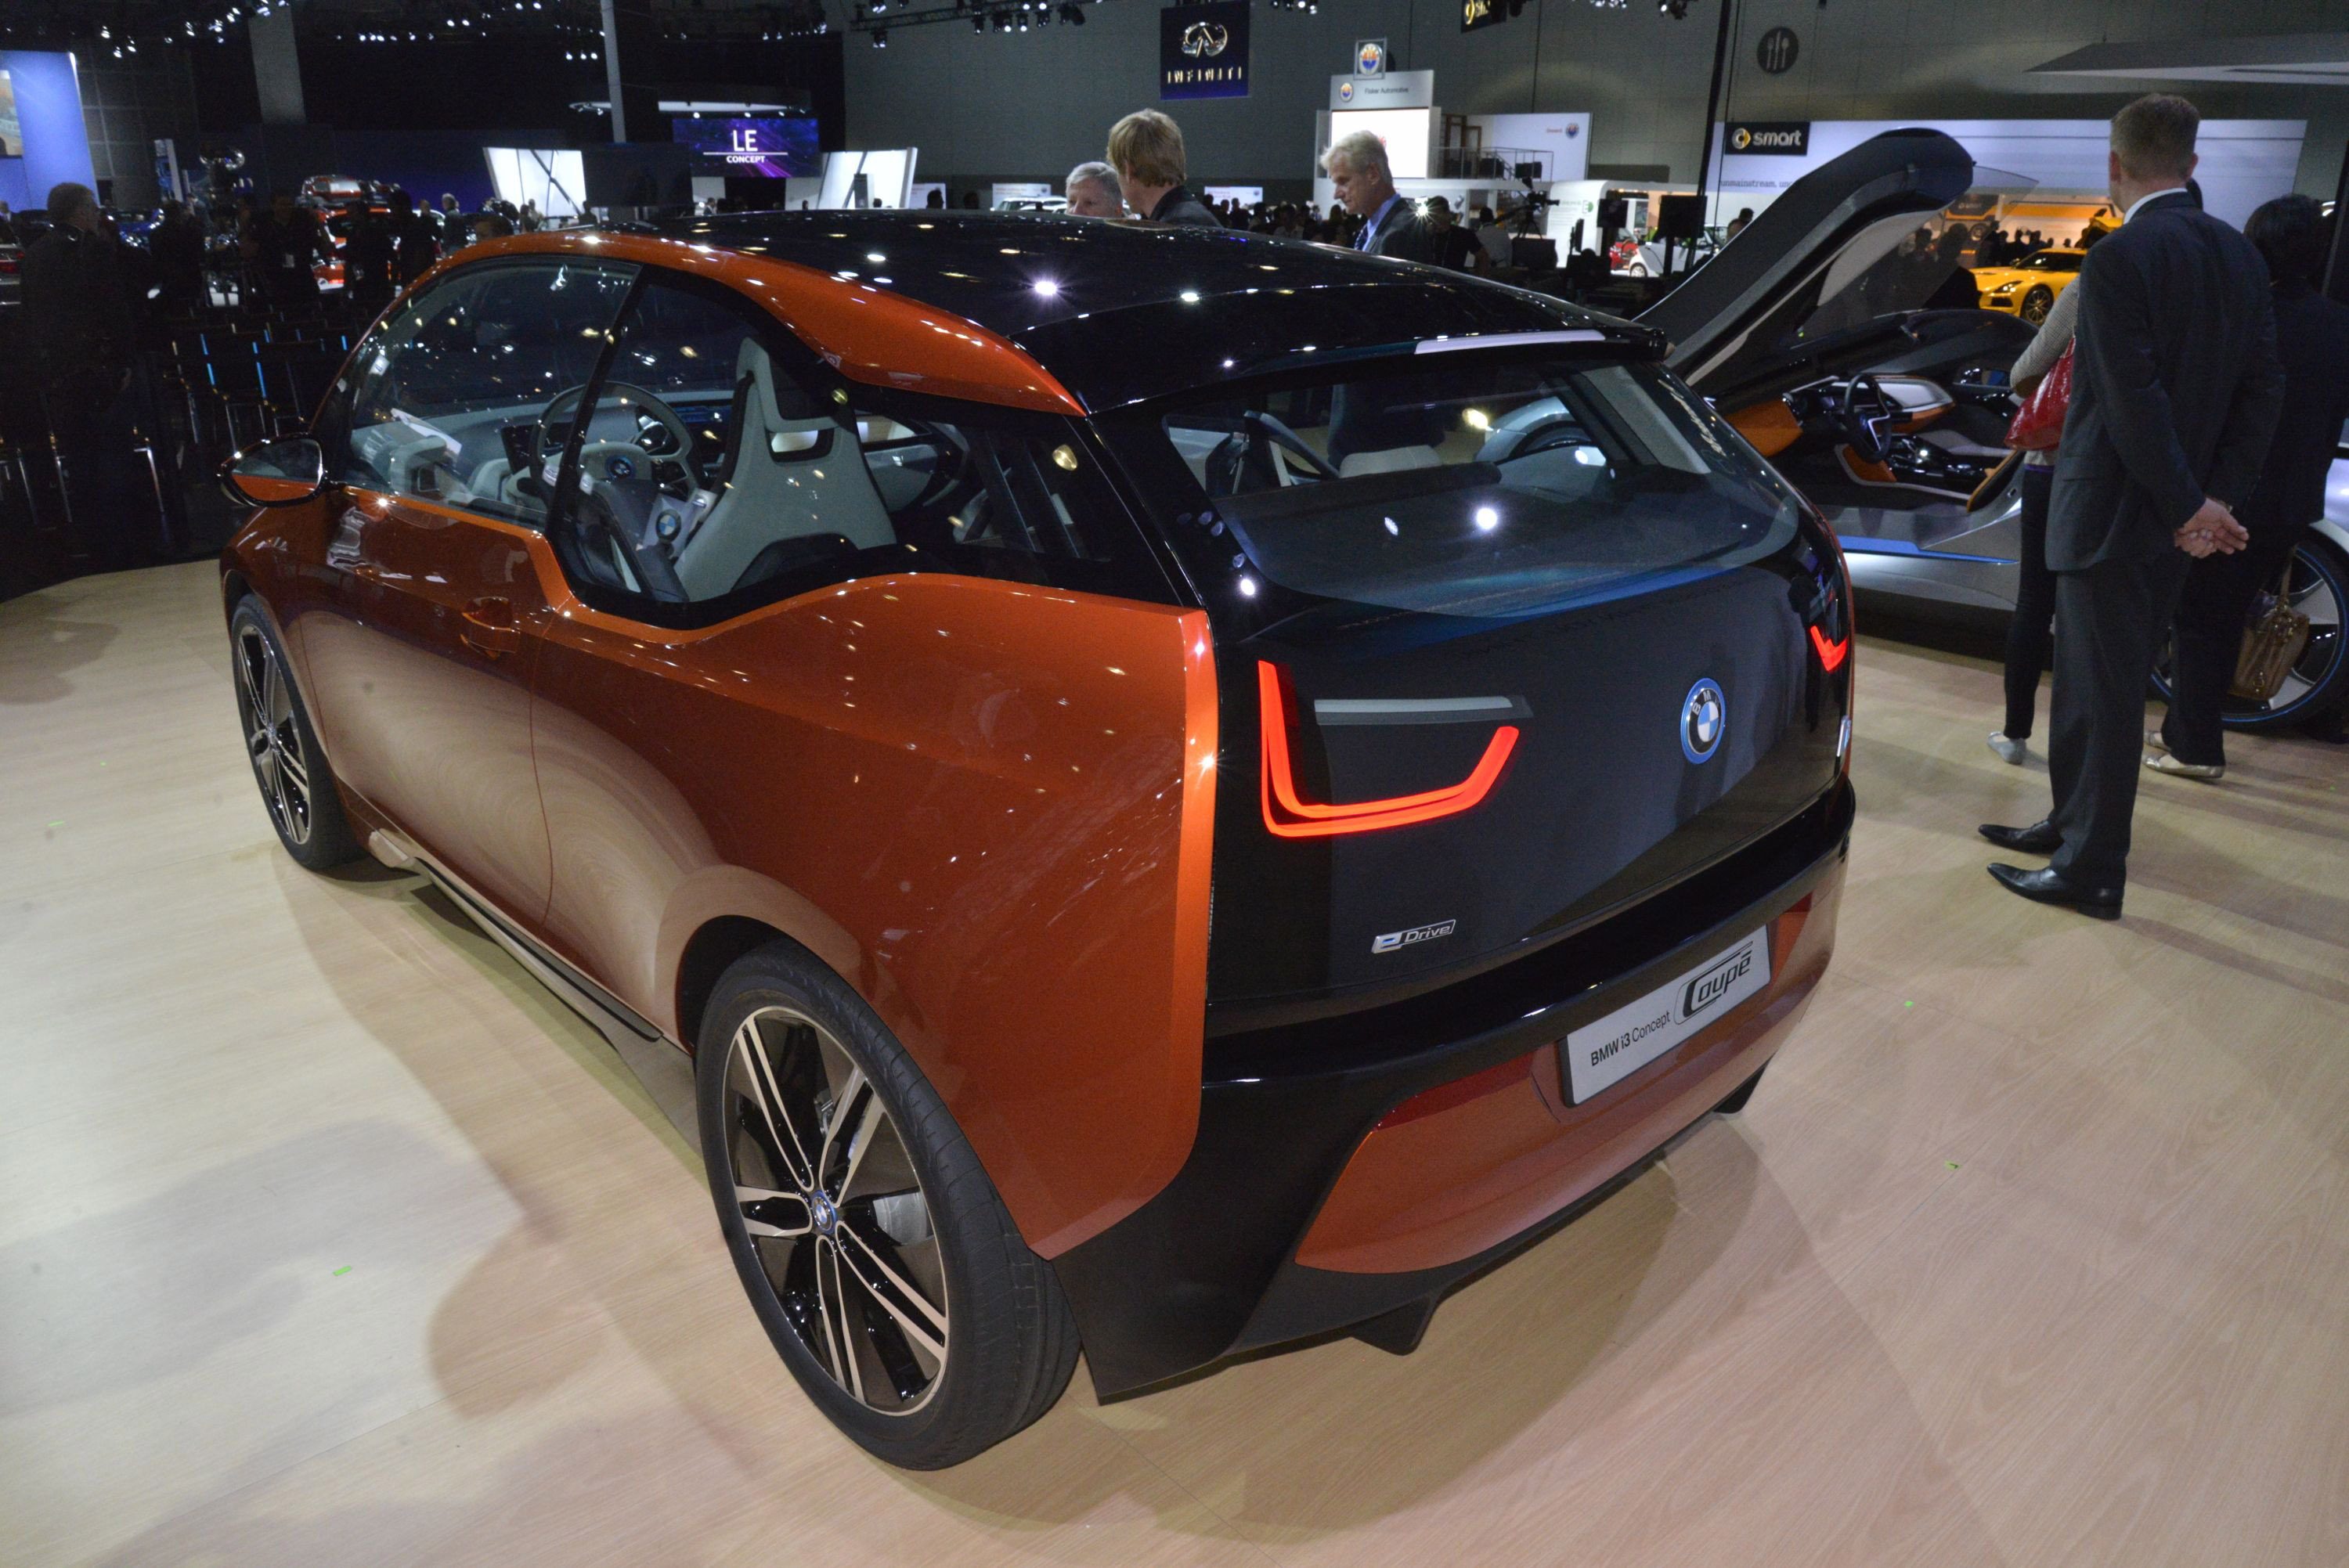 BMW i3 Concept Coupe Los Angeles